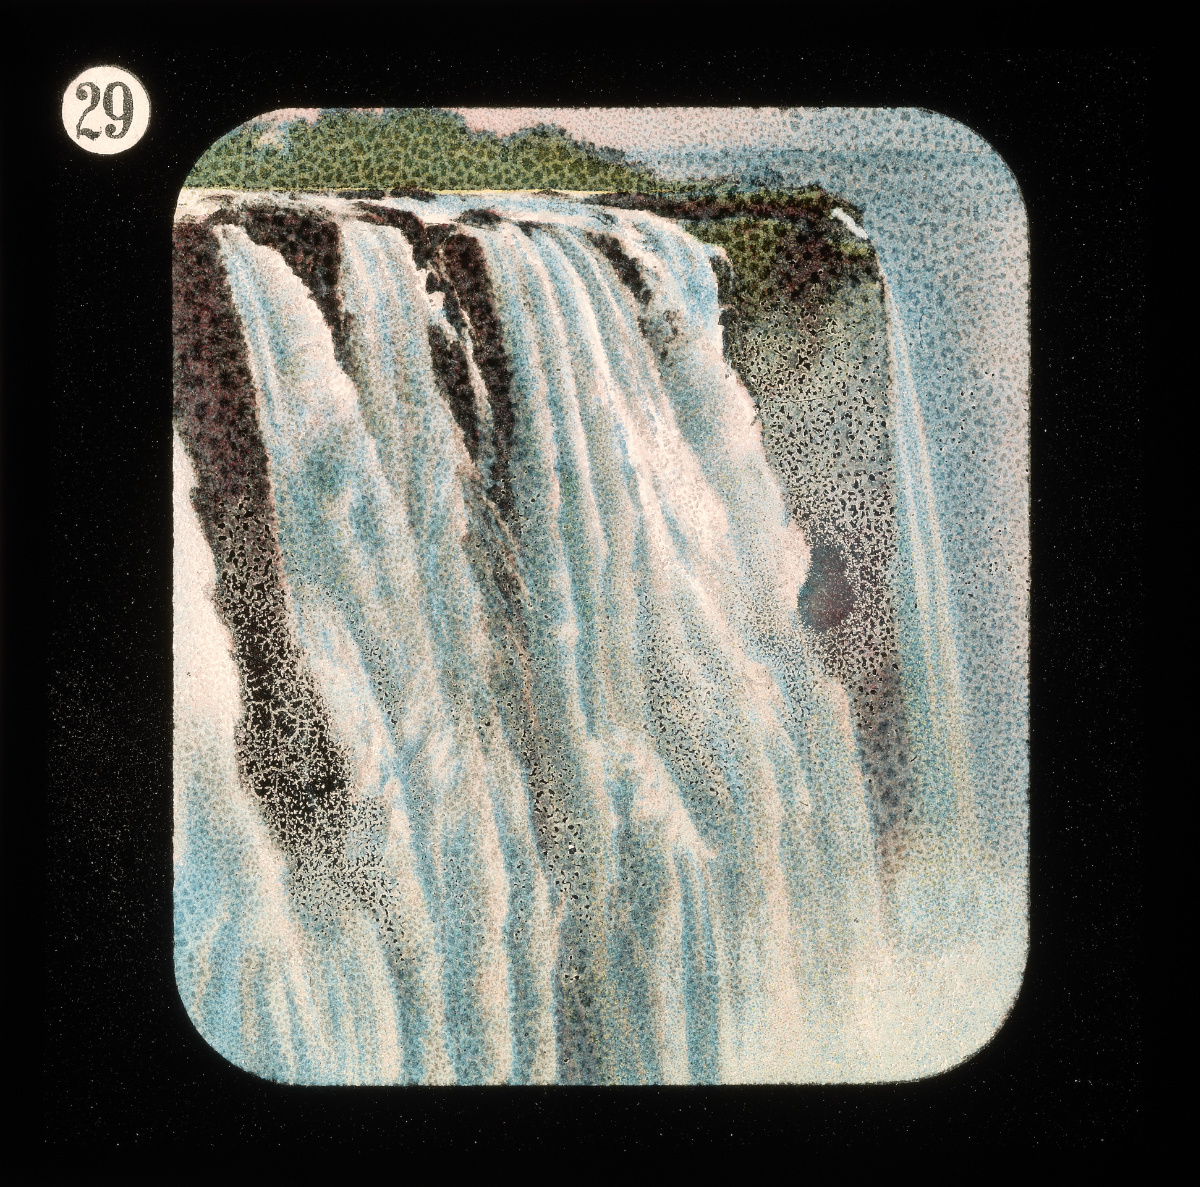 Victoria Falls. Image from Lantern Slides of the Life, Adventures, and Work of David Livingstone (London Missionary Society c.1900:[3]). Images courtesy of the Smithsonian Libraries, Washington, D.C.